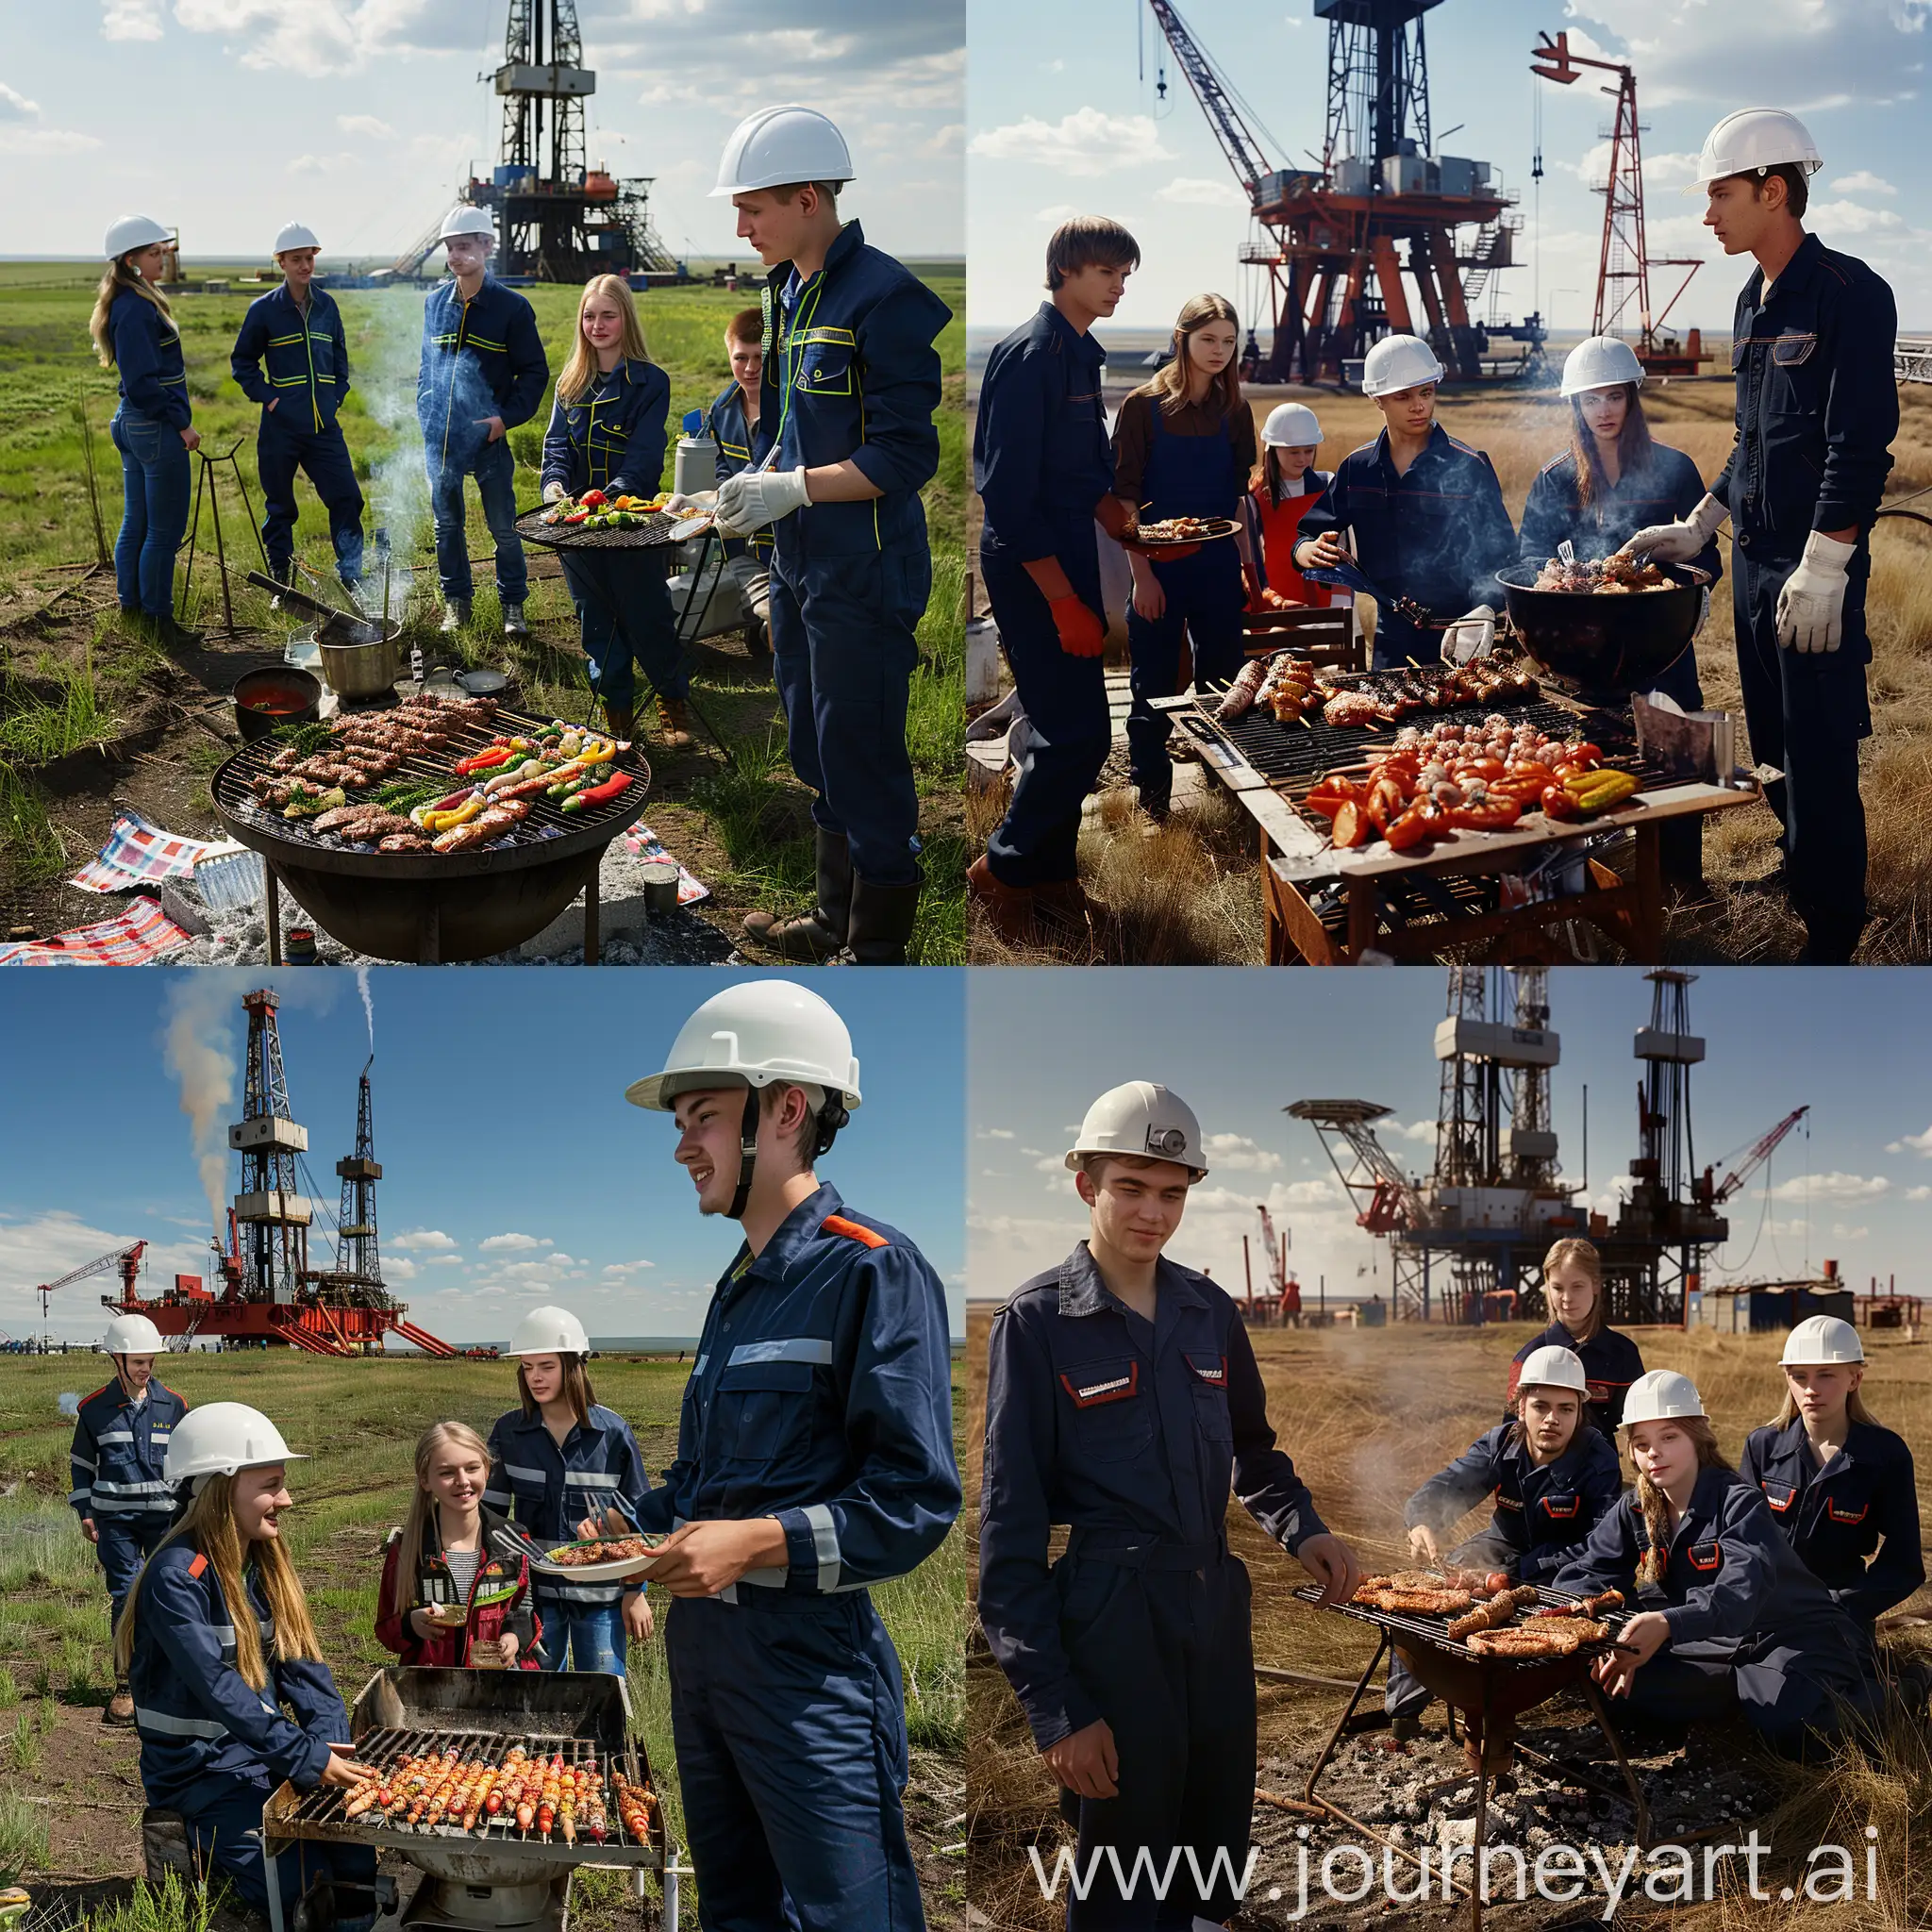 Youthful-Oil-Workers-Enjoying-Barbecue-Picnic-in-Russian-Steppe